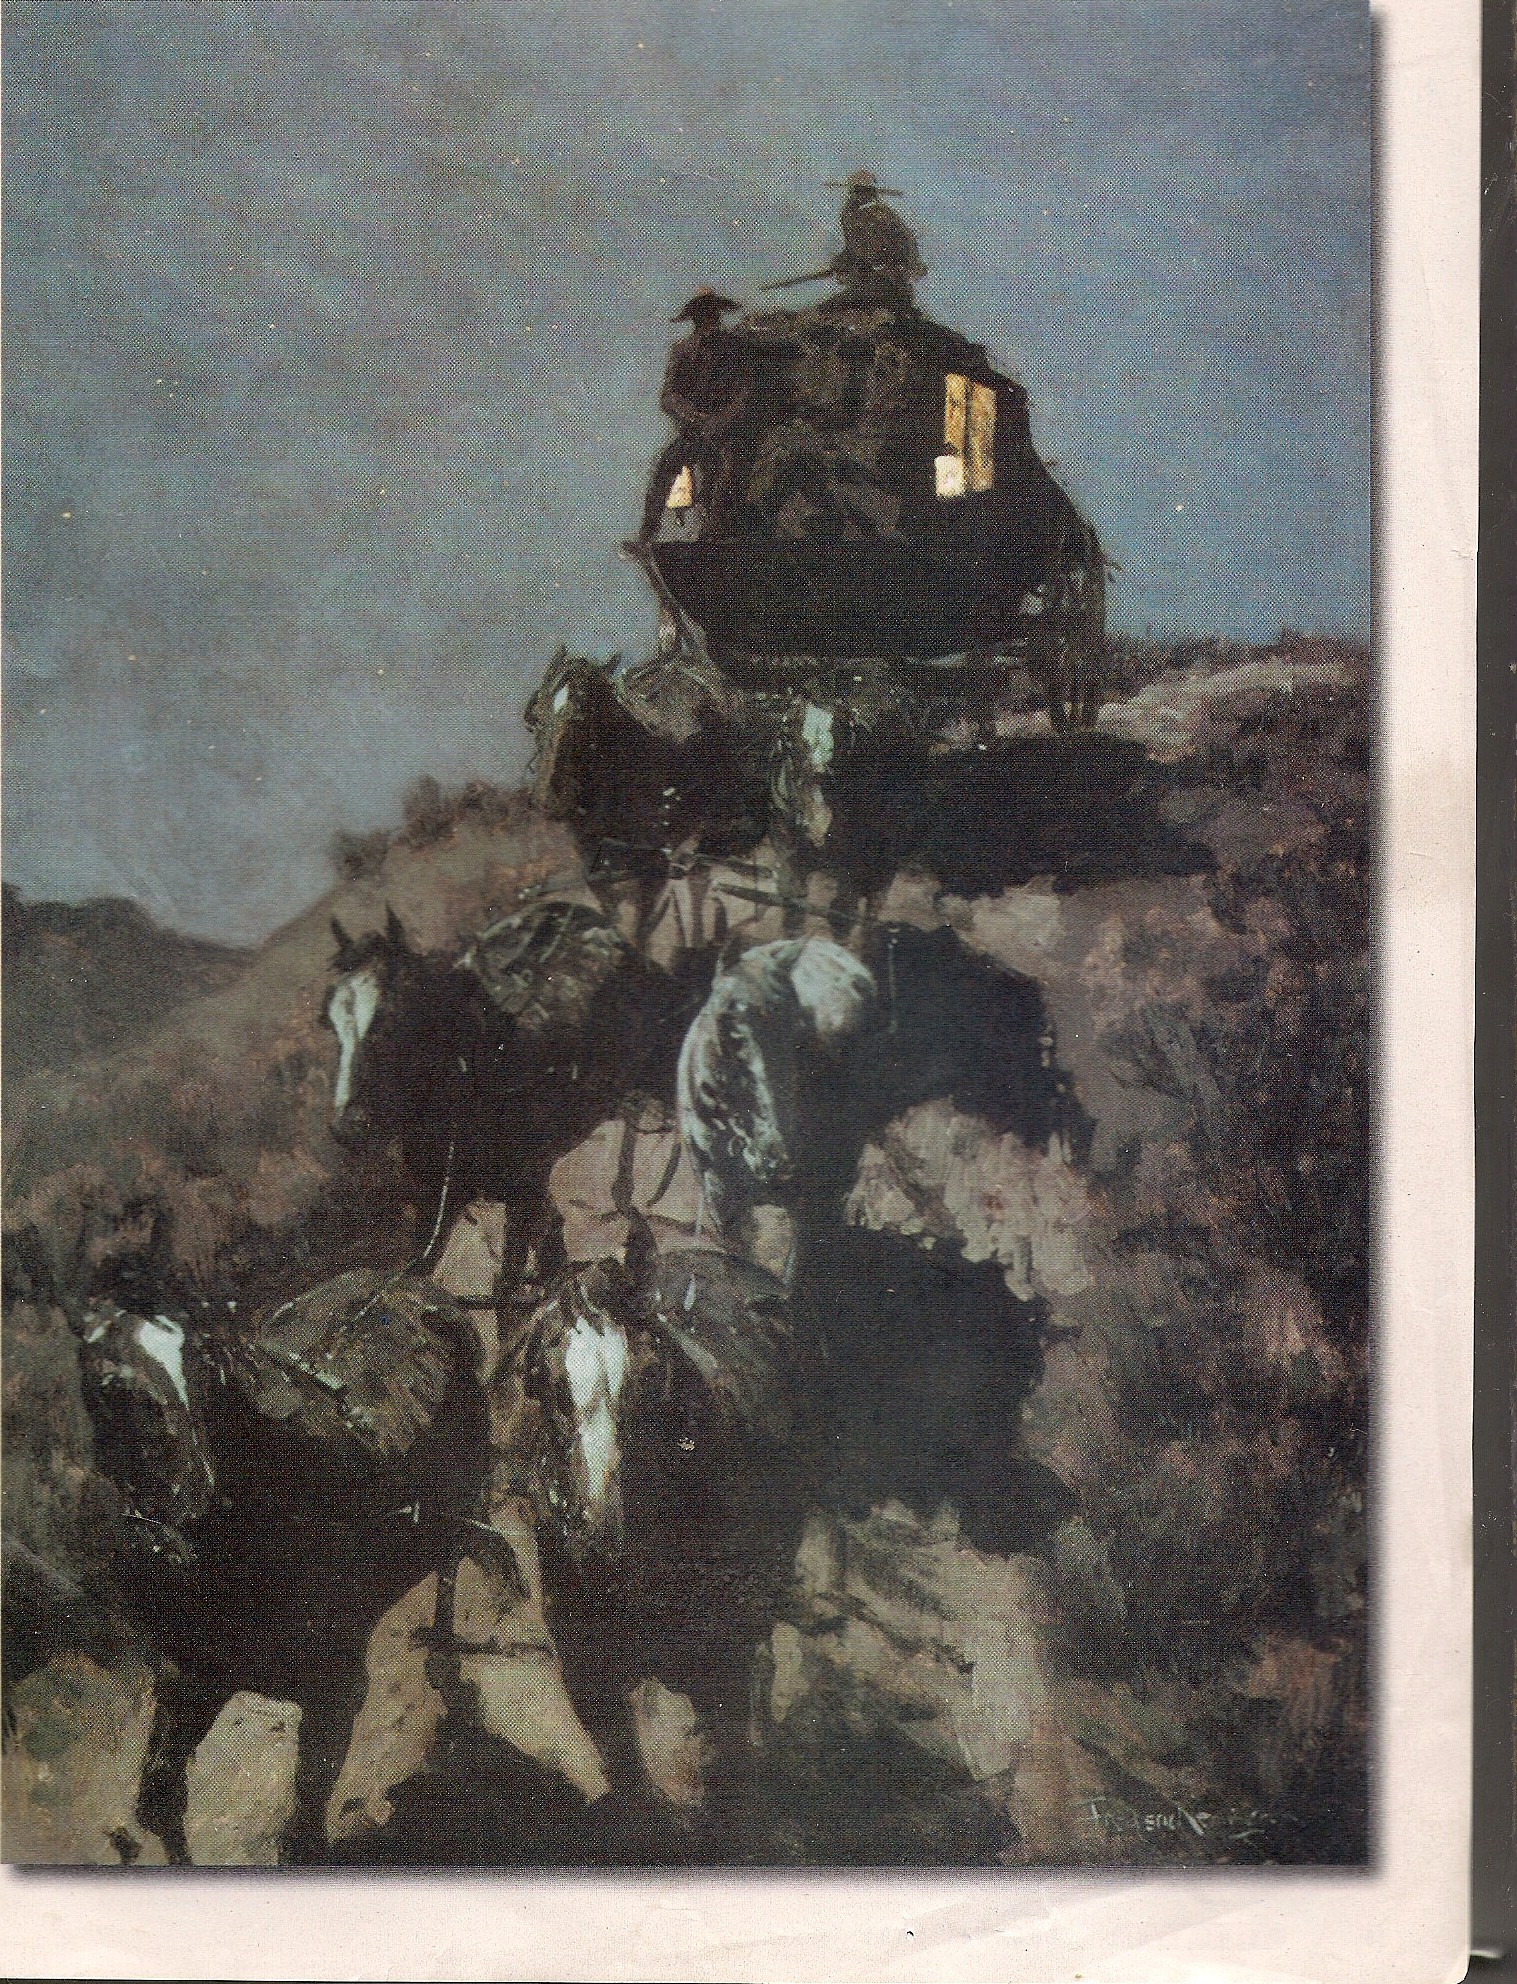 Frederic Remington 1902 The Old Stage Coach of the Plains.jpg